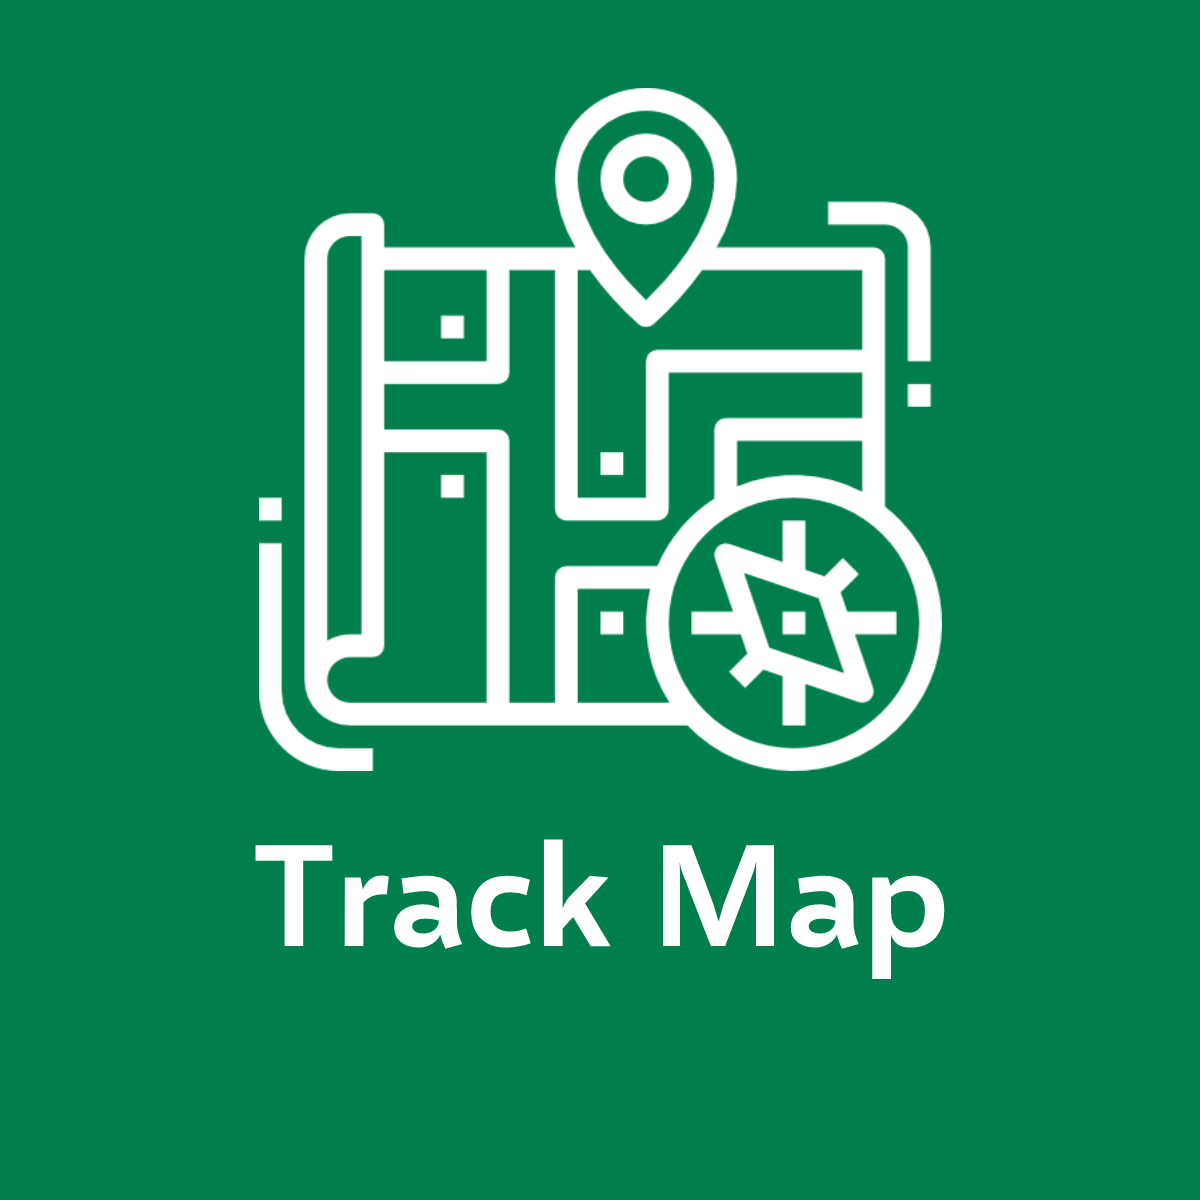 Track Map ‑ Link Tracking